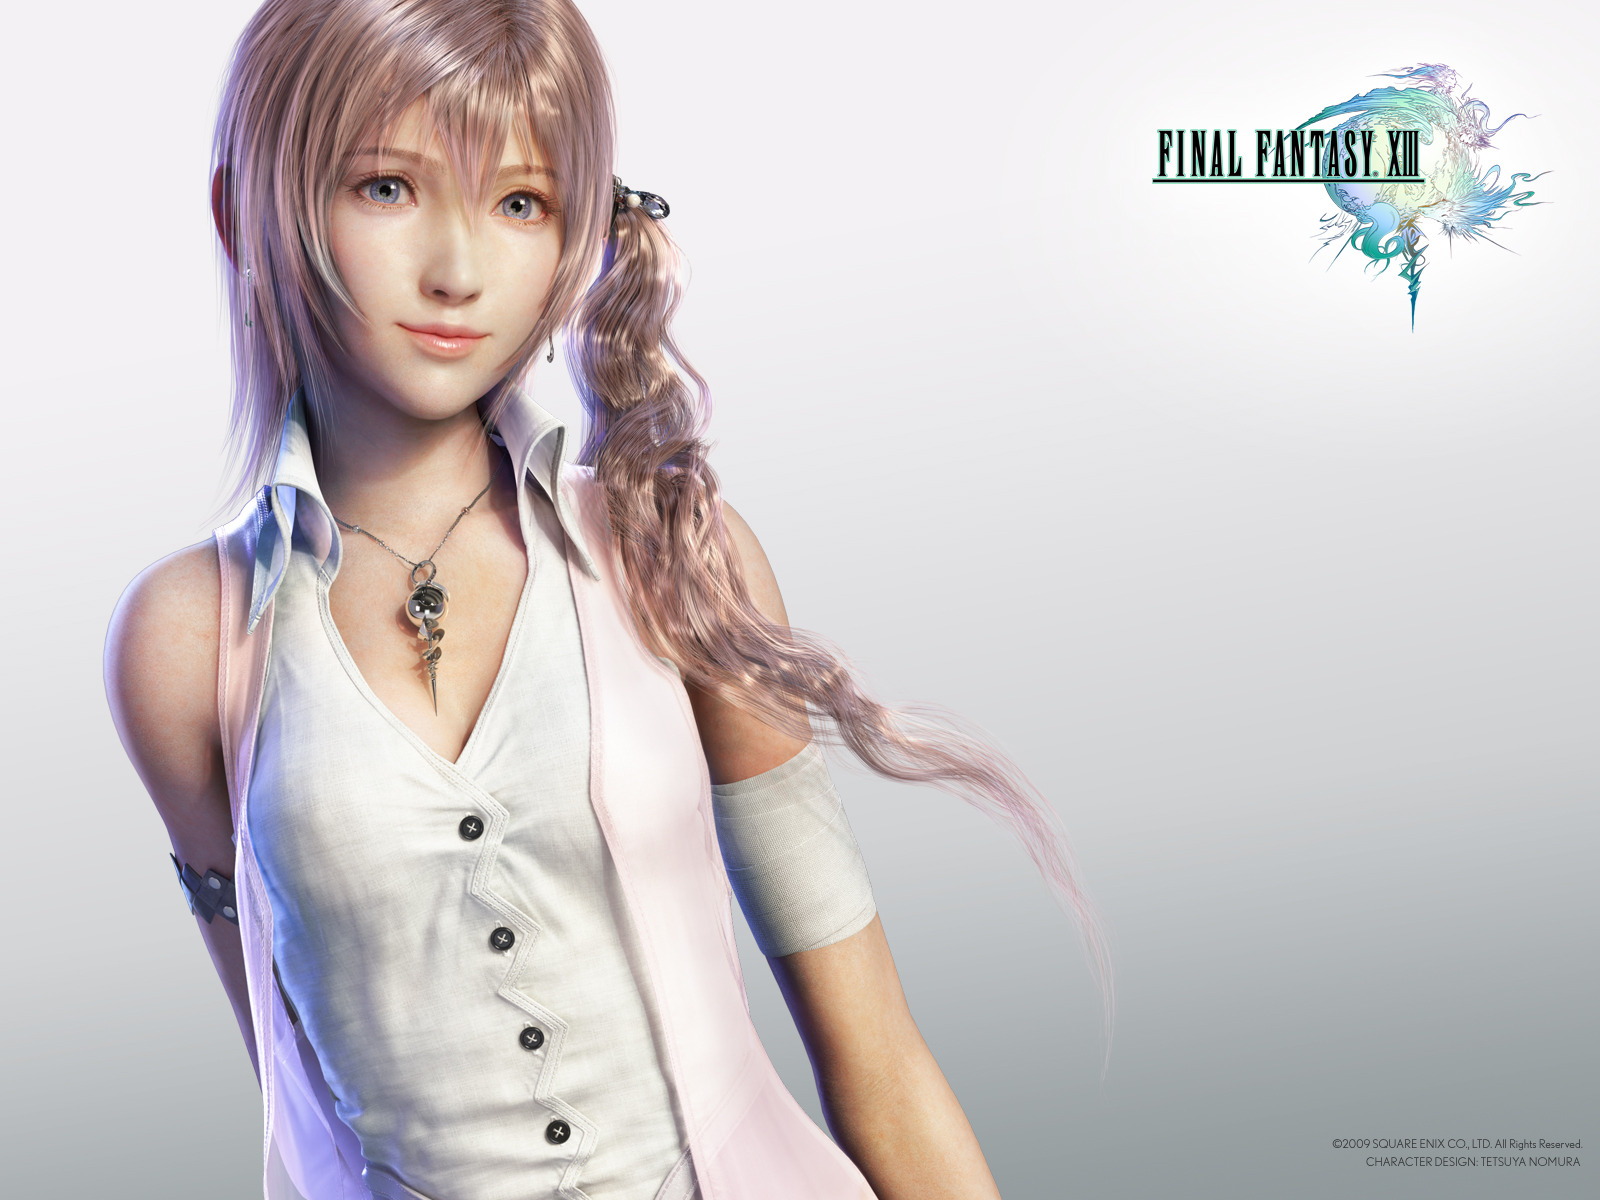 Awesome HD Wallpaper Collection Final Fantasy Xiii Girl